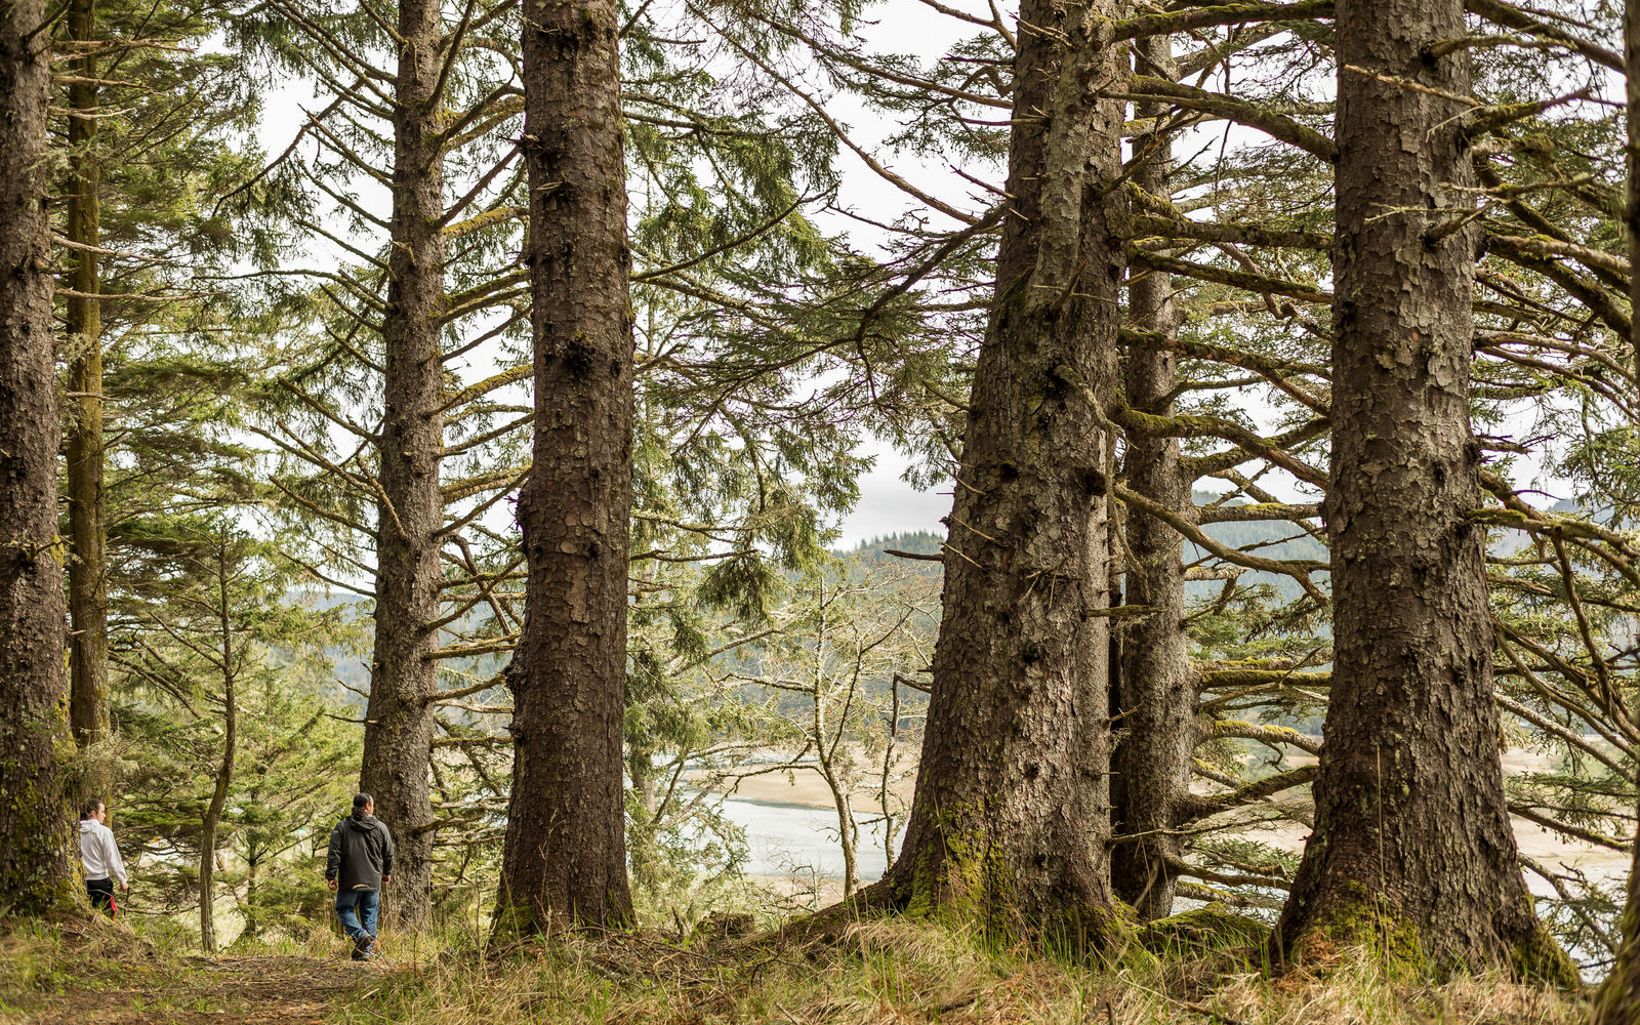 Makah tribal members walk through old-growth Sitka spruce forests near Neah Bay.